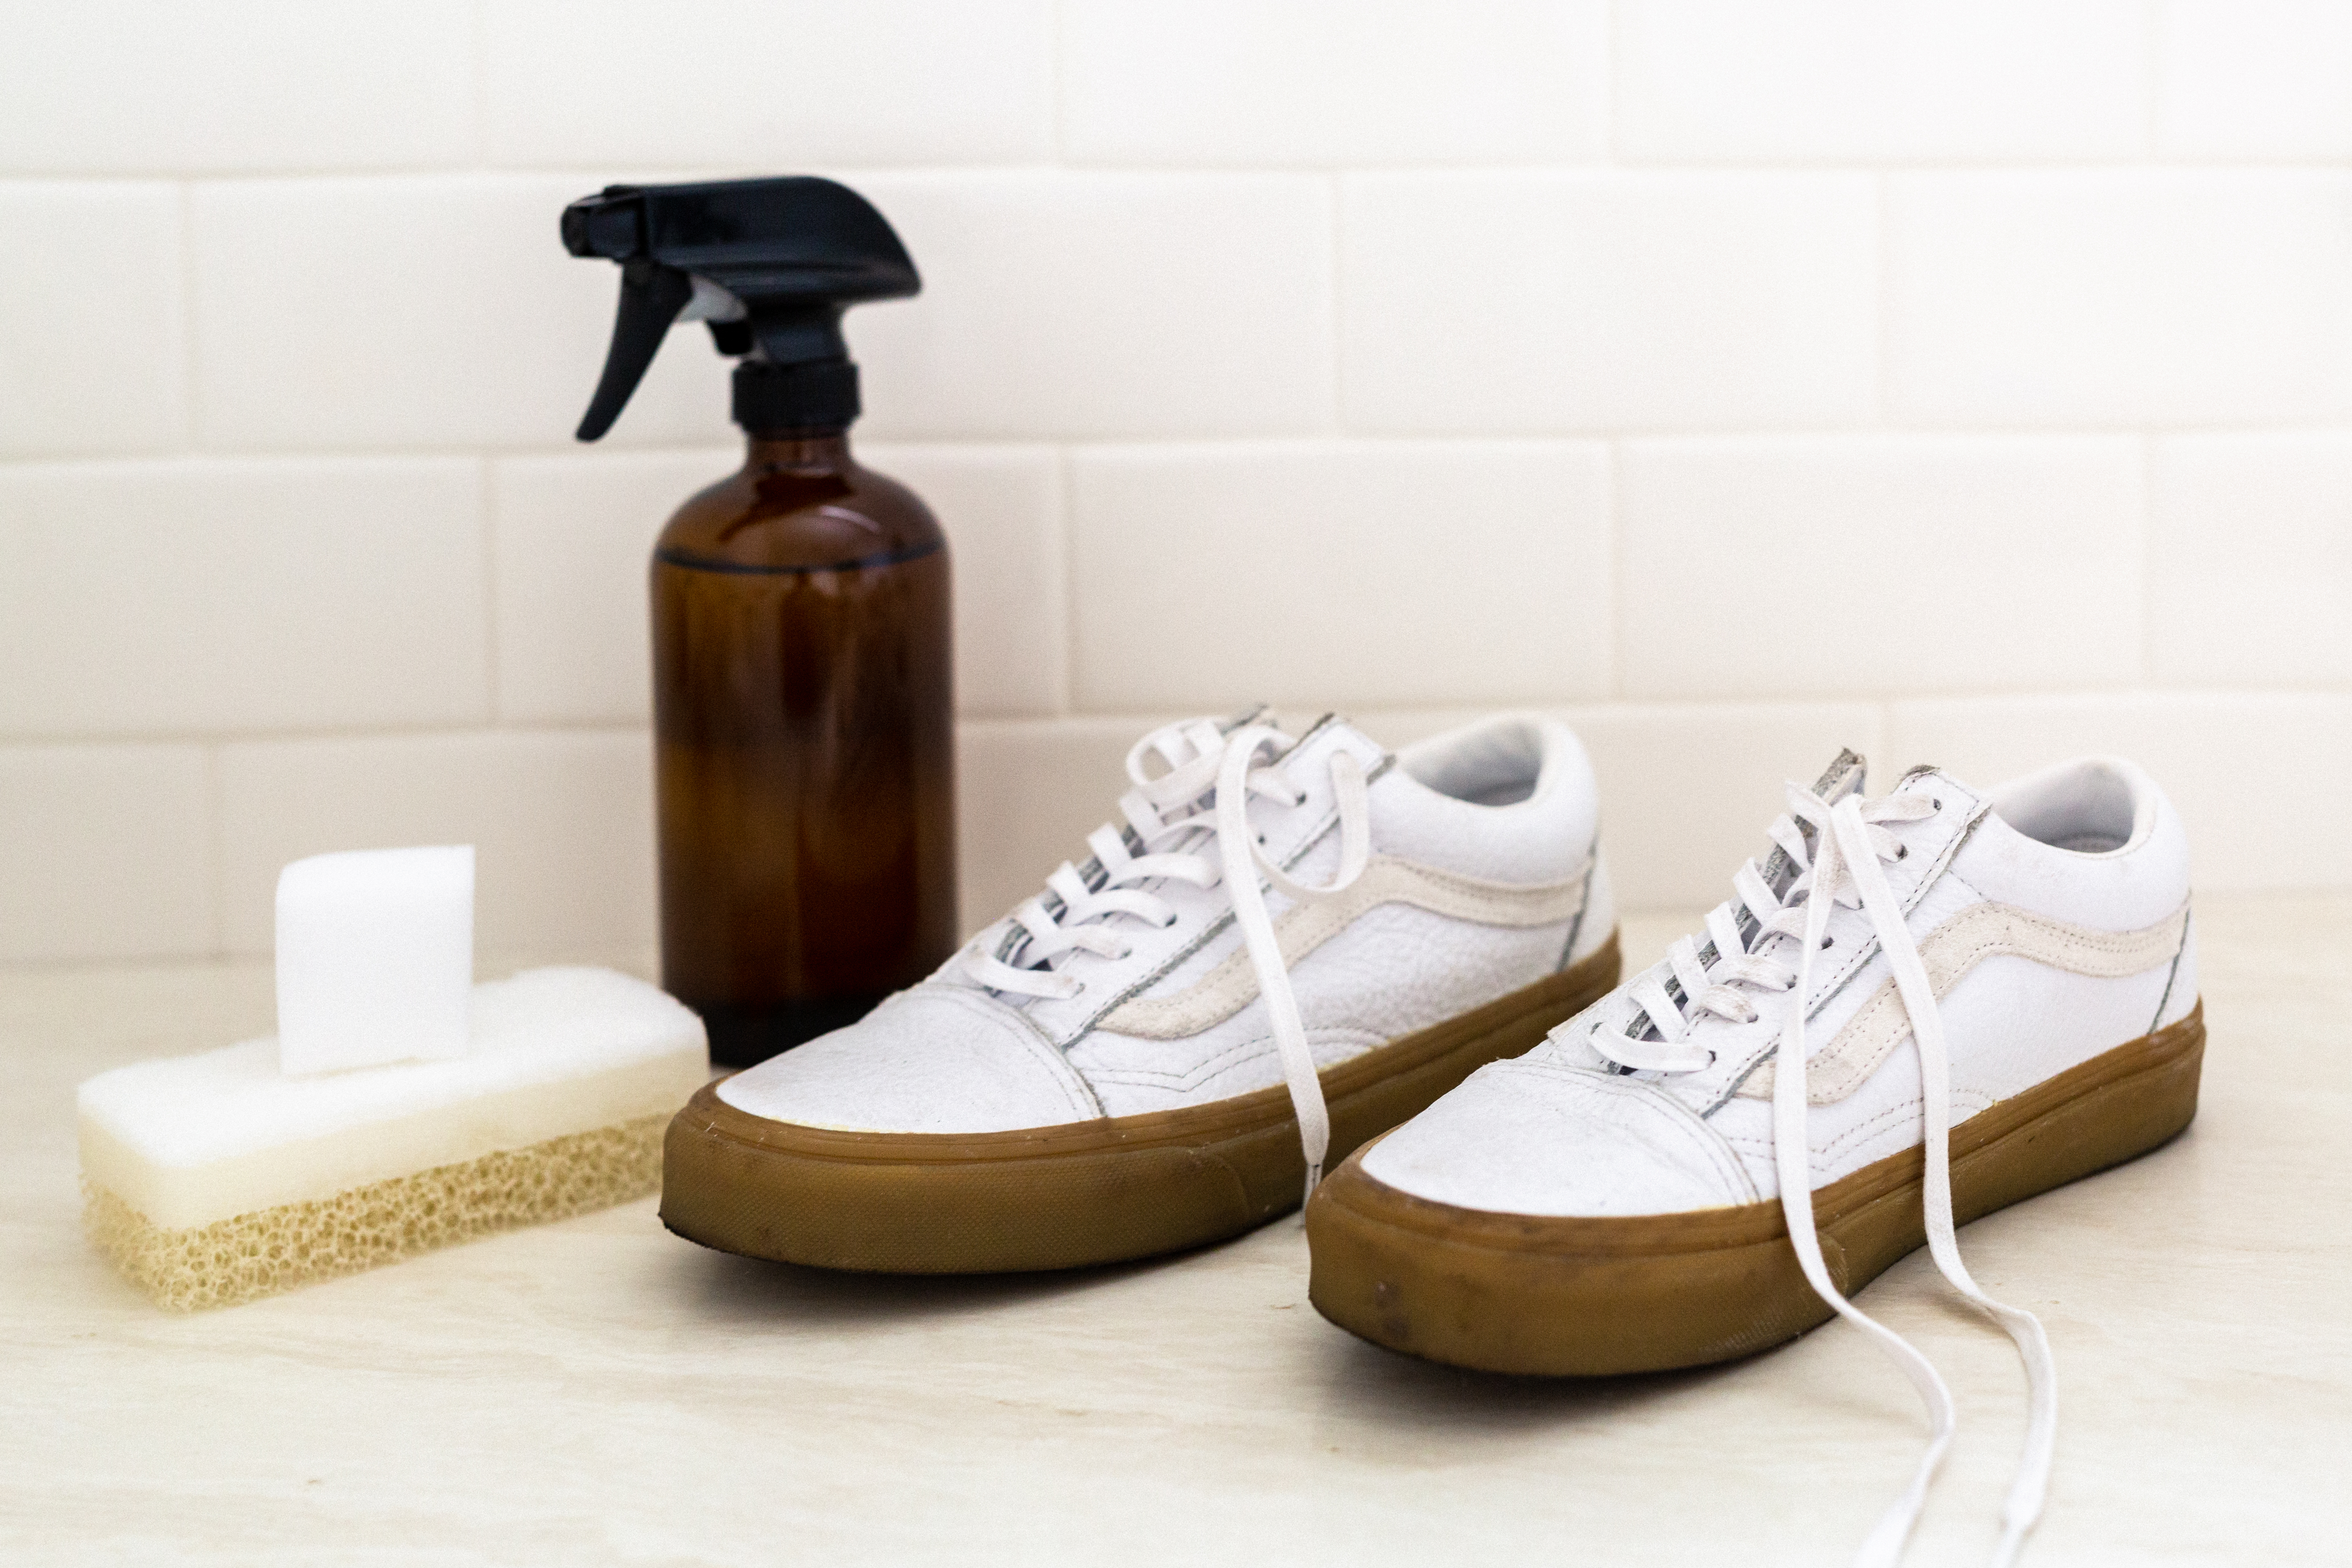 Biggest sneaker-life hack: use an eraser to remove stains/ dirt from  sneakers. Works especially well on nubuck, suede, leather and rubber. Most  of you probably already knew - but just in case